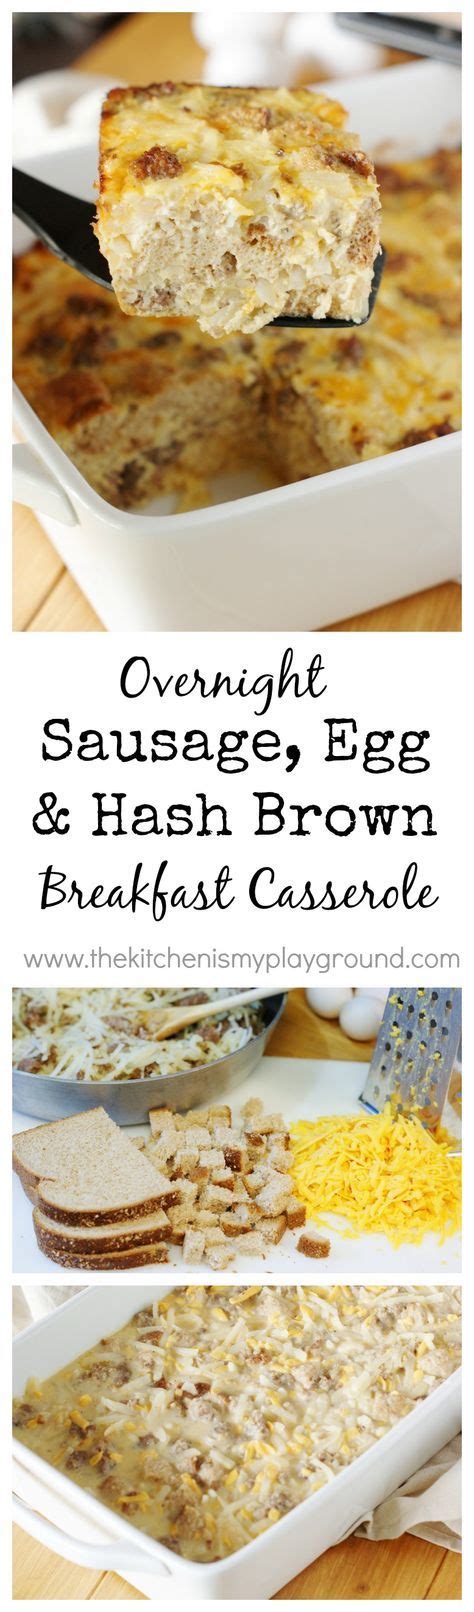 Create this overnight breakfast casserole with classic brunch flavors for a slow, relaxing morning with the family. Overnight Sausage, Egg and Hash Brown Breakfast Casserole ~ whip up a hearty breakfast casserole ...